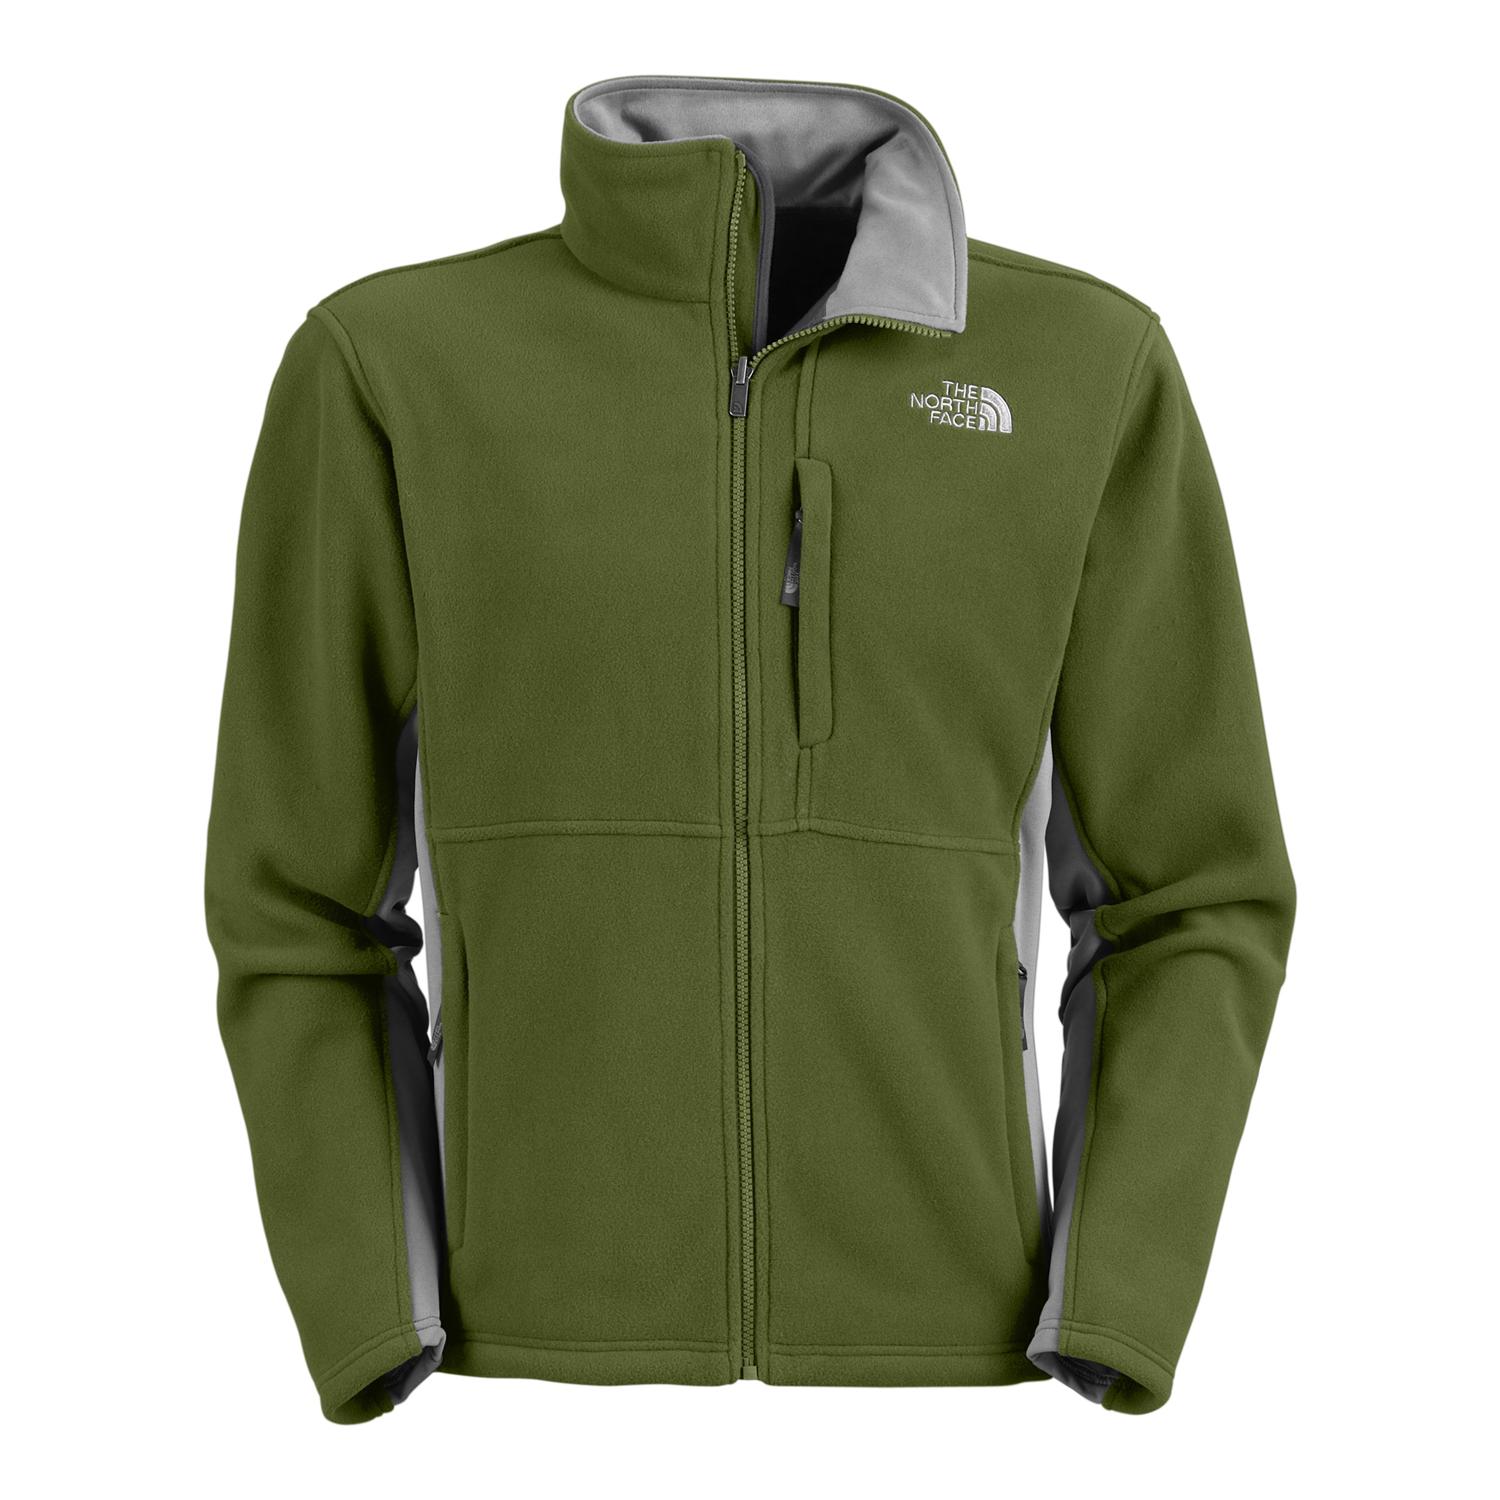 The North Face Eminent Fleece Jacket | evo outlet